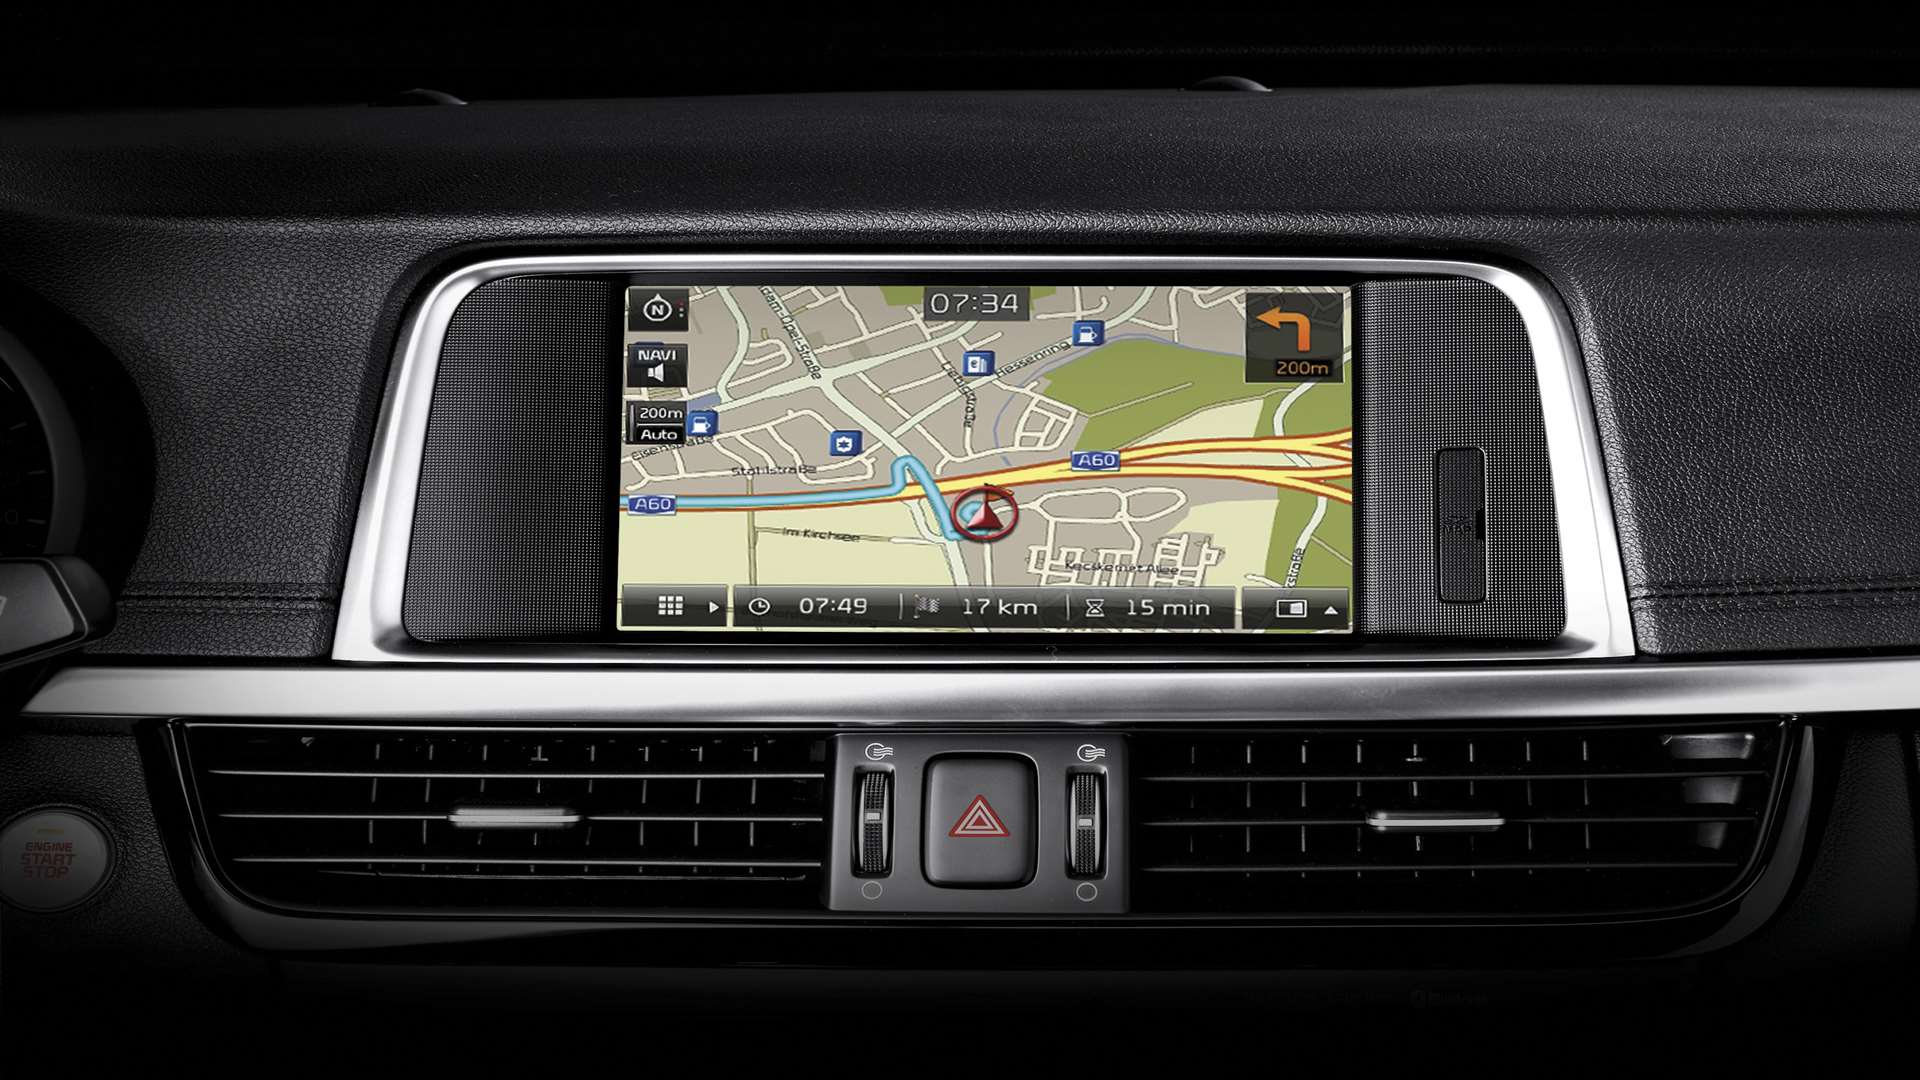 There is a seven-inch touchscreen with sat nav